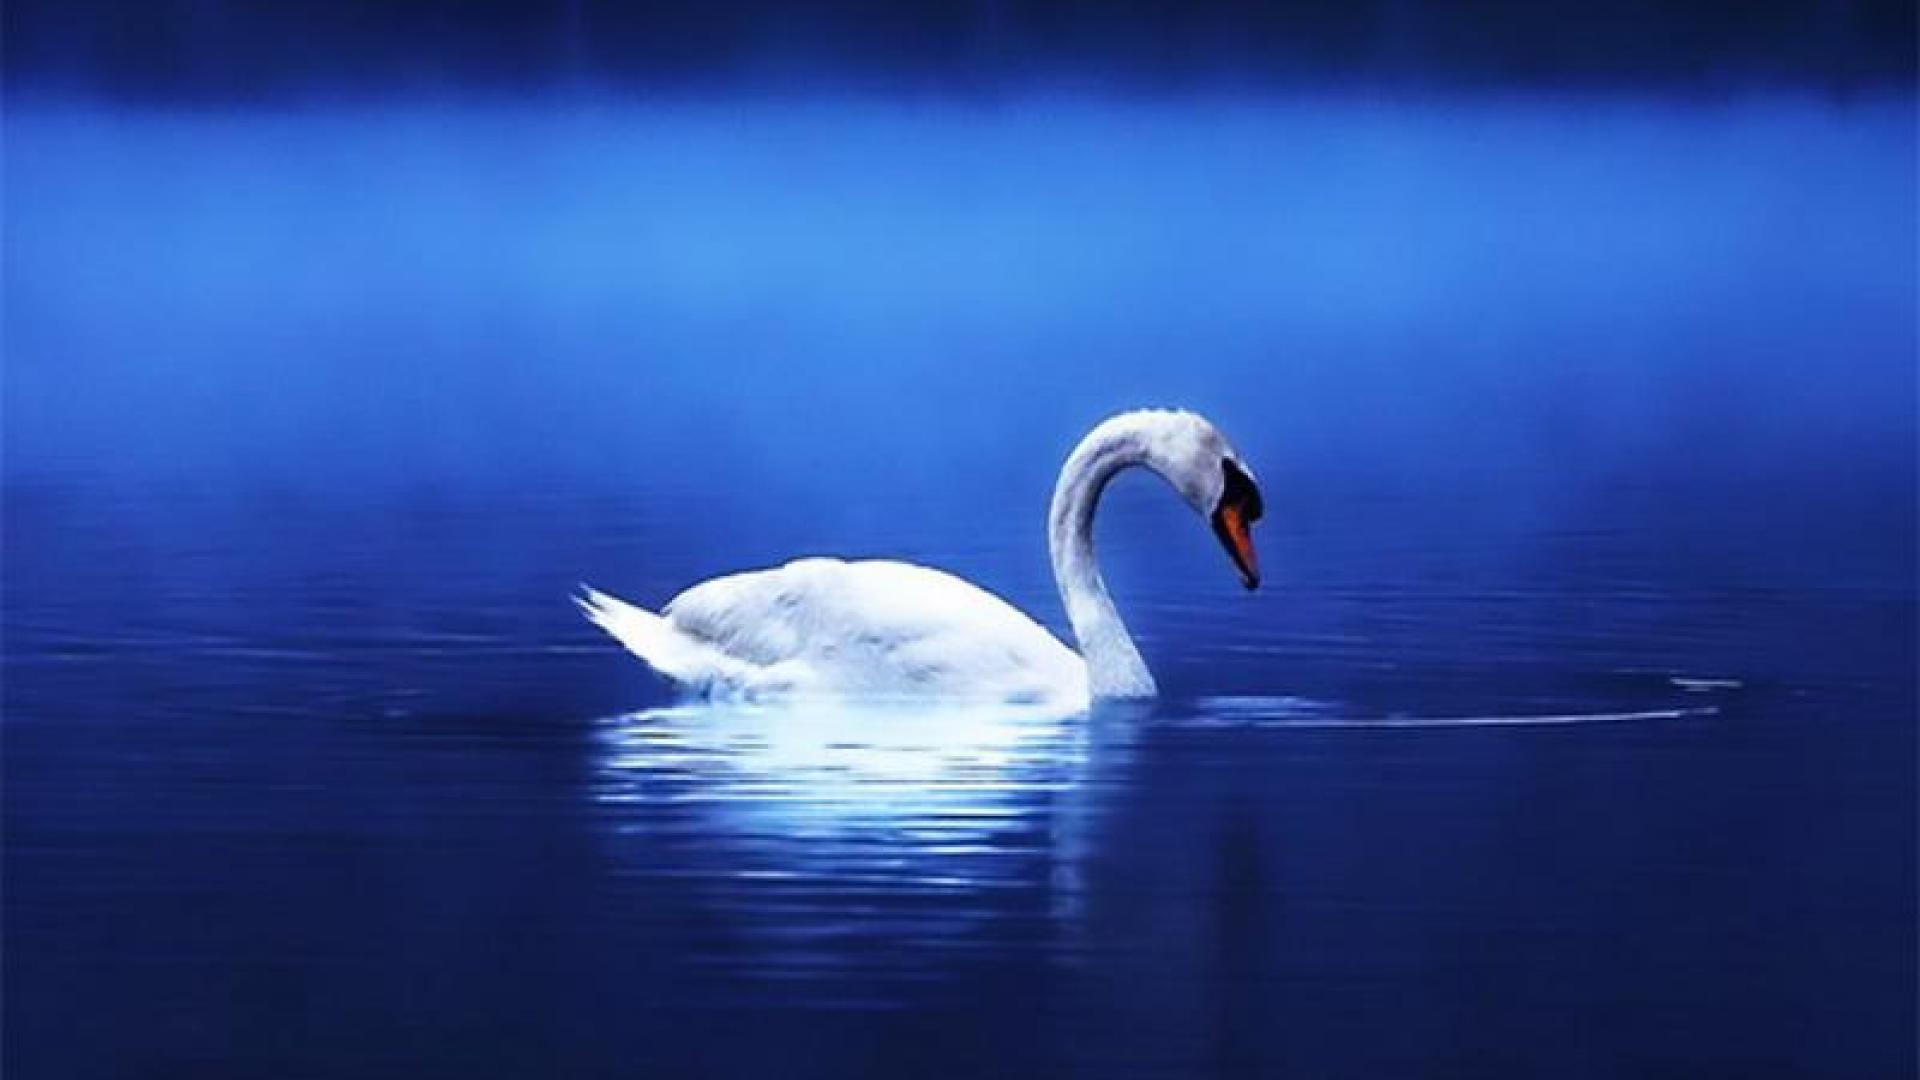 280+ Swan HD Wallpapers and Backgrounds